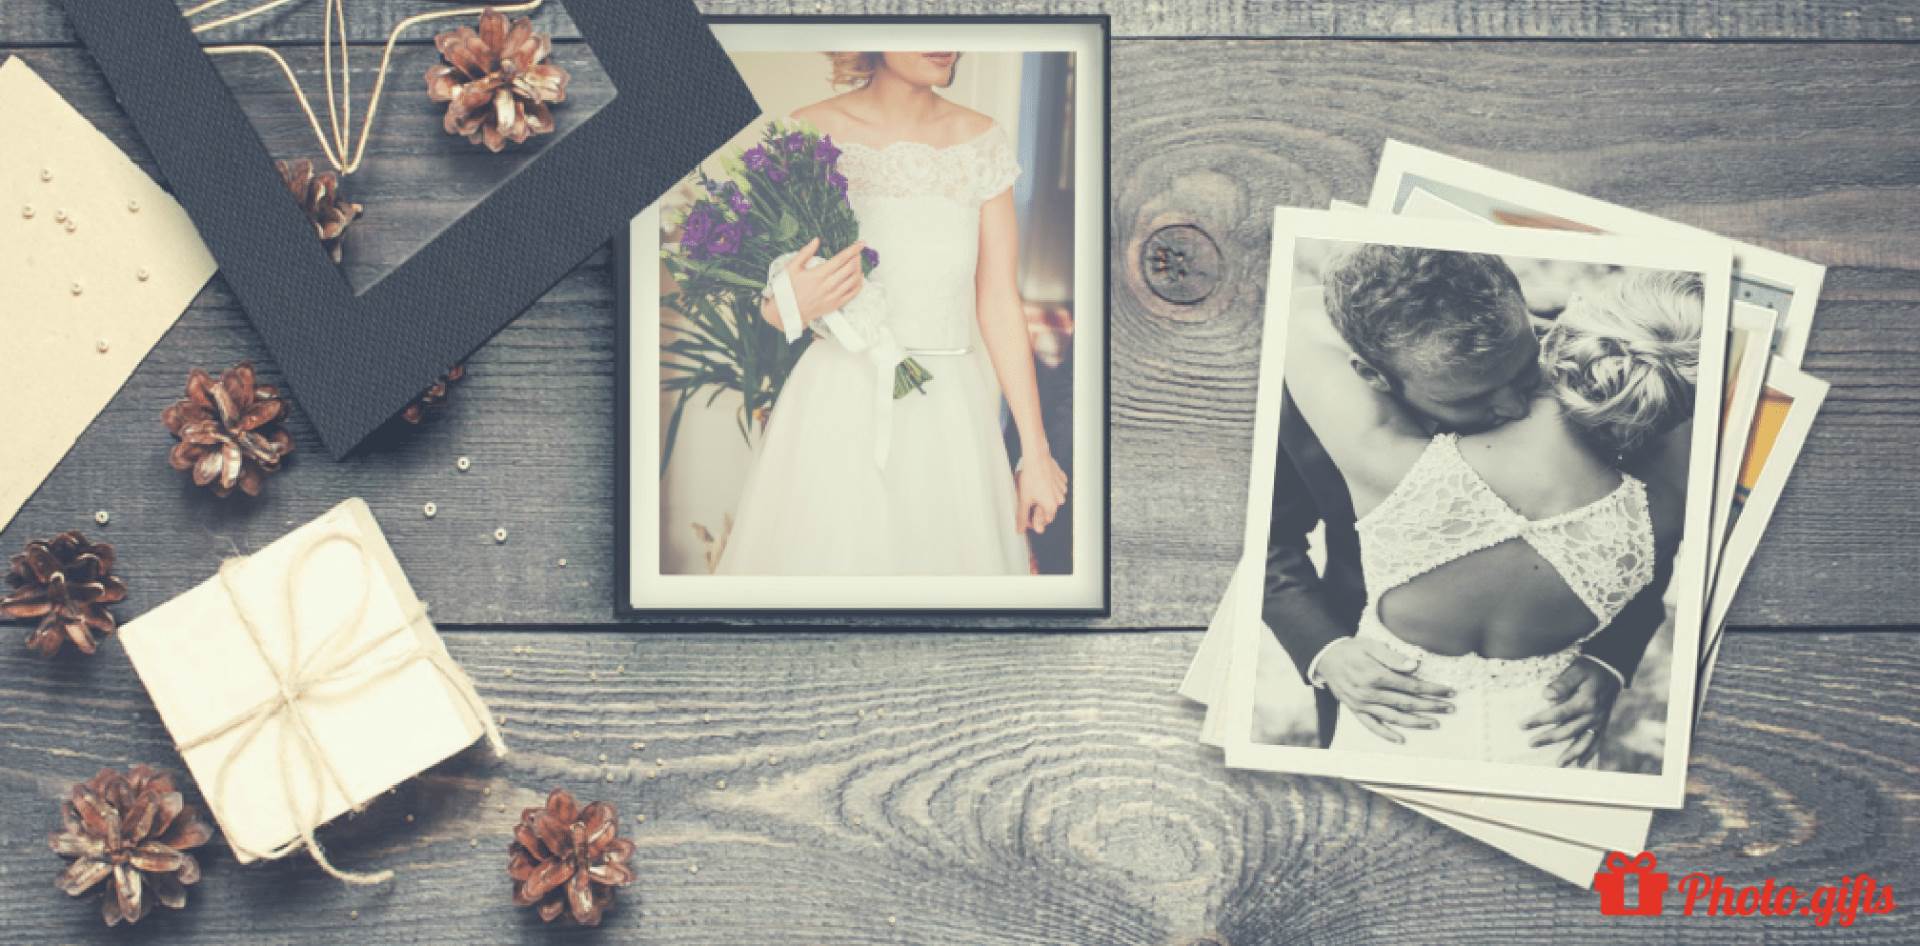 Share your favourite wedding photographs in a Photo Box